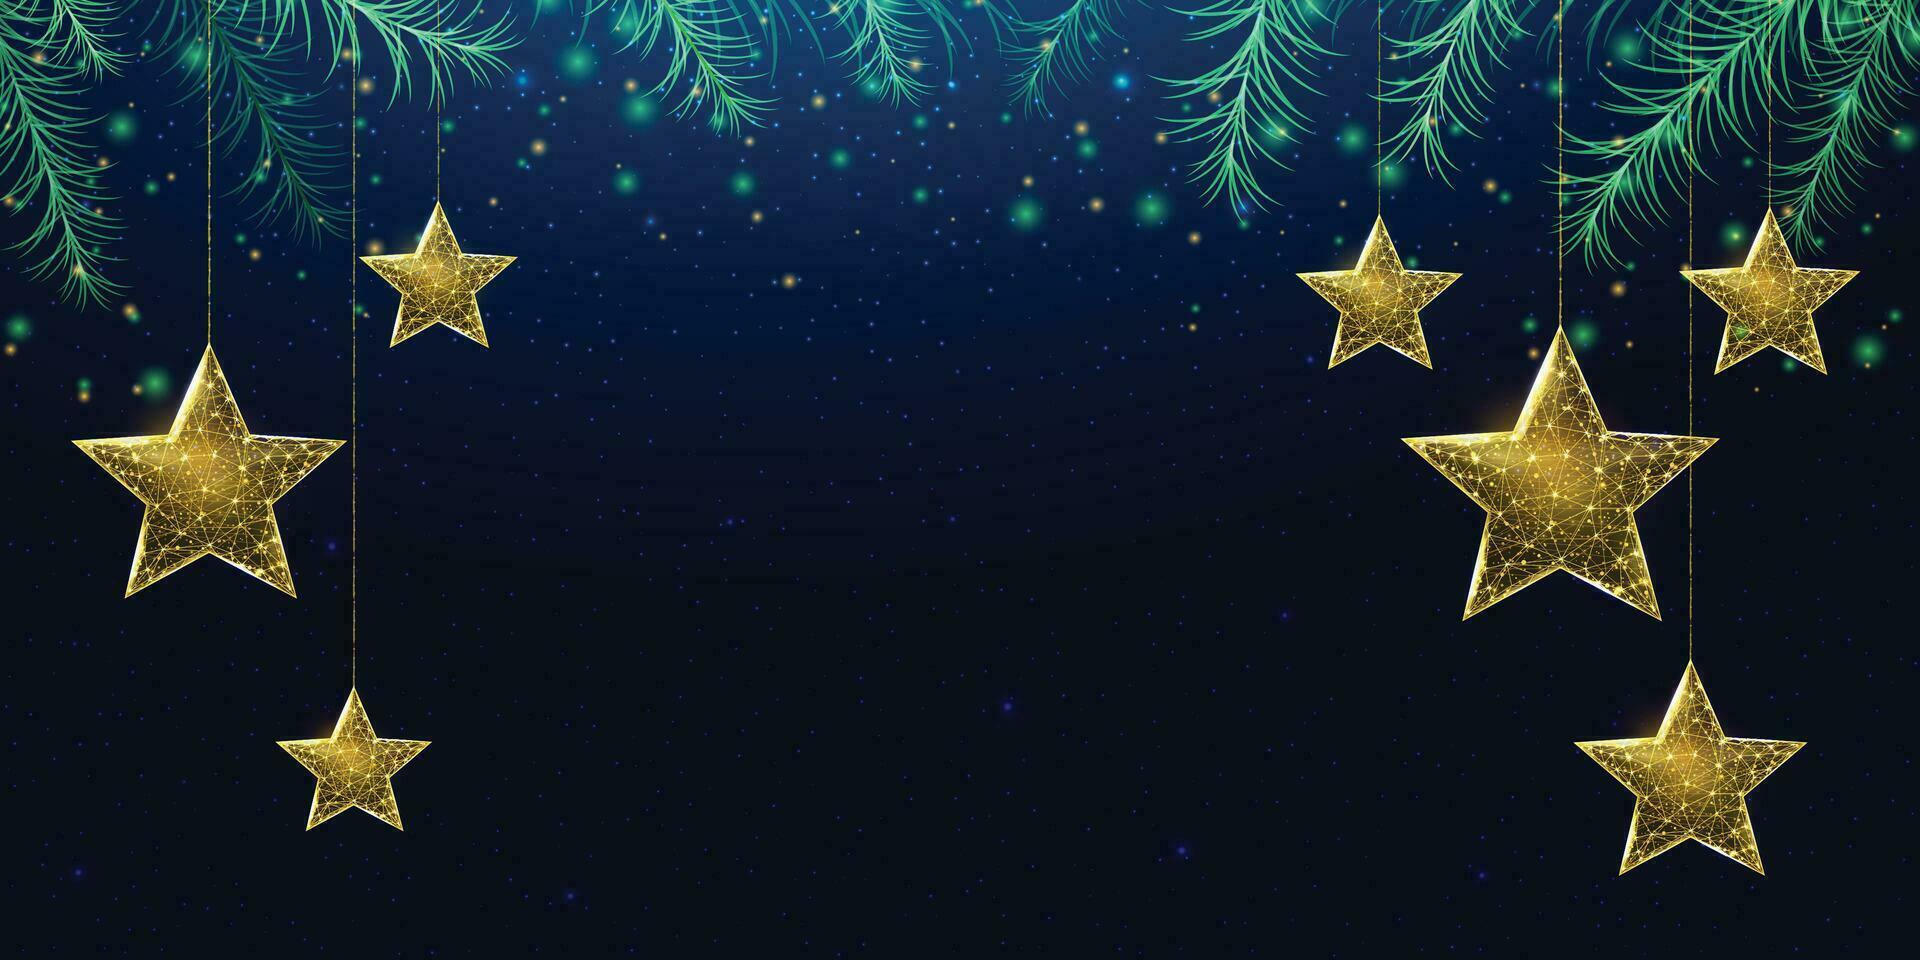 Wireframe Christmas stars and Christmas tree branches, low poly style. New Year banner. Abstract modern 3d vector illustration on blue background.